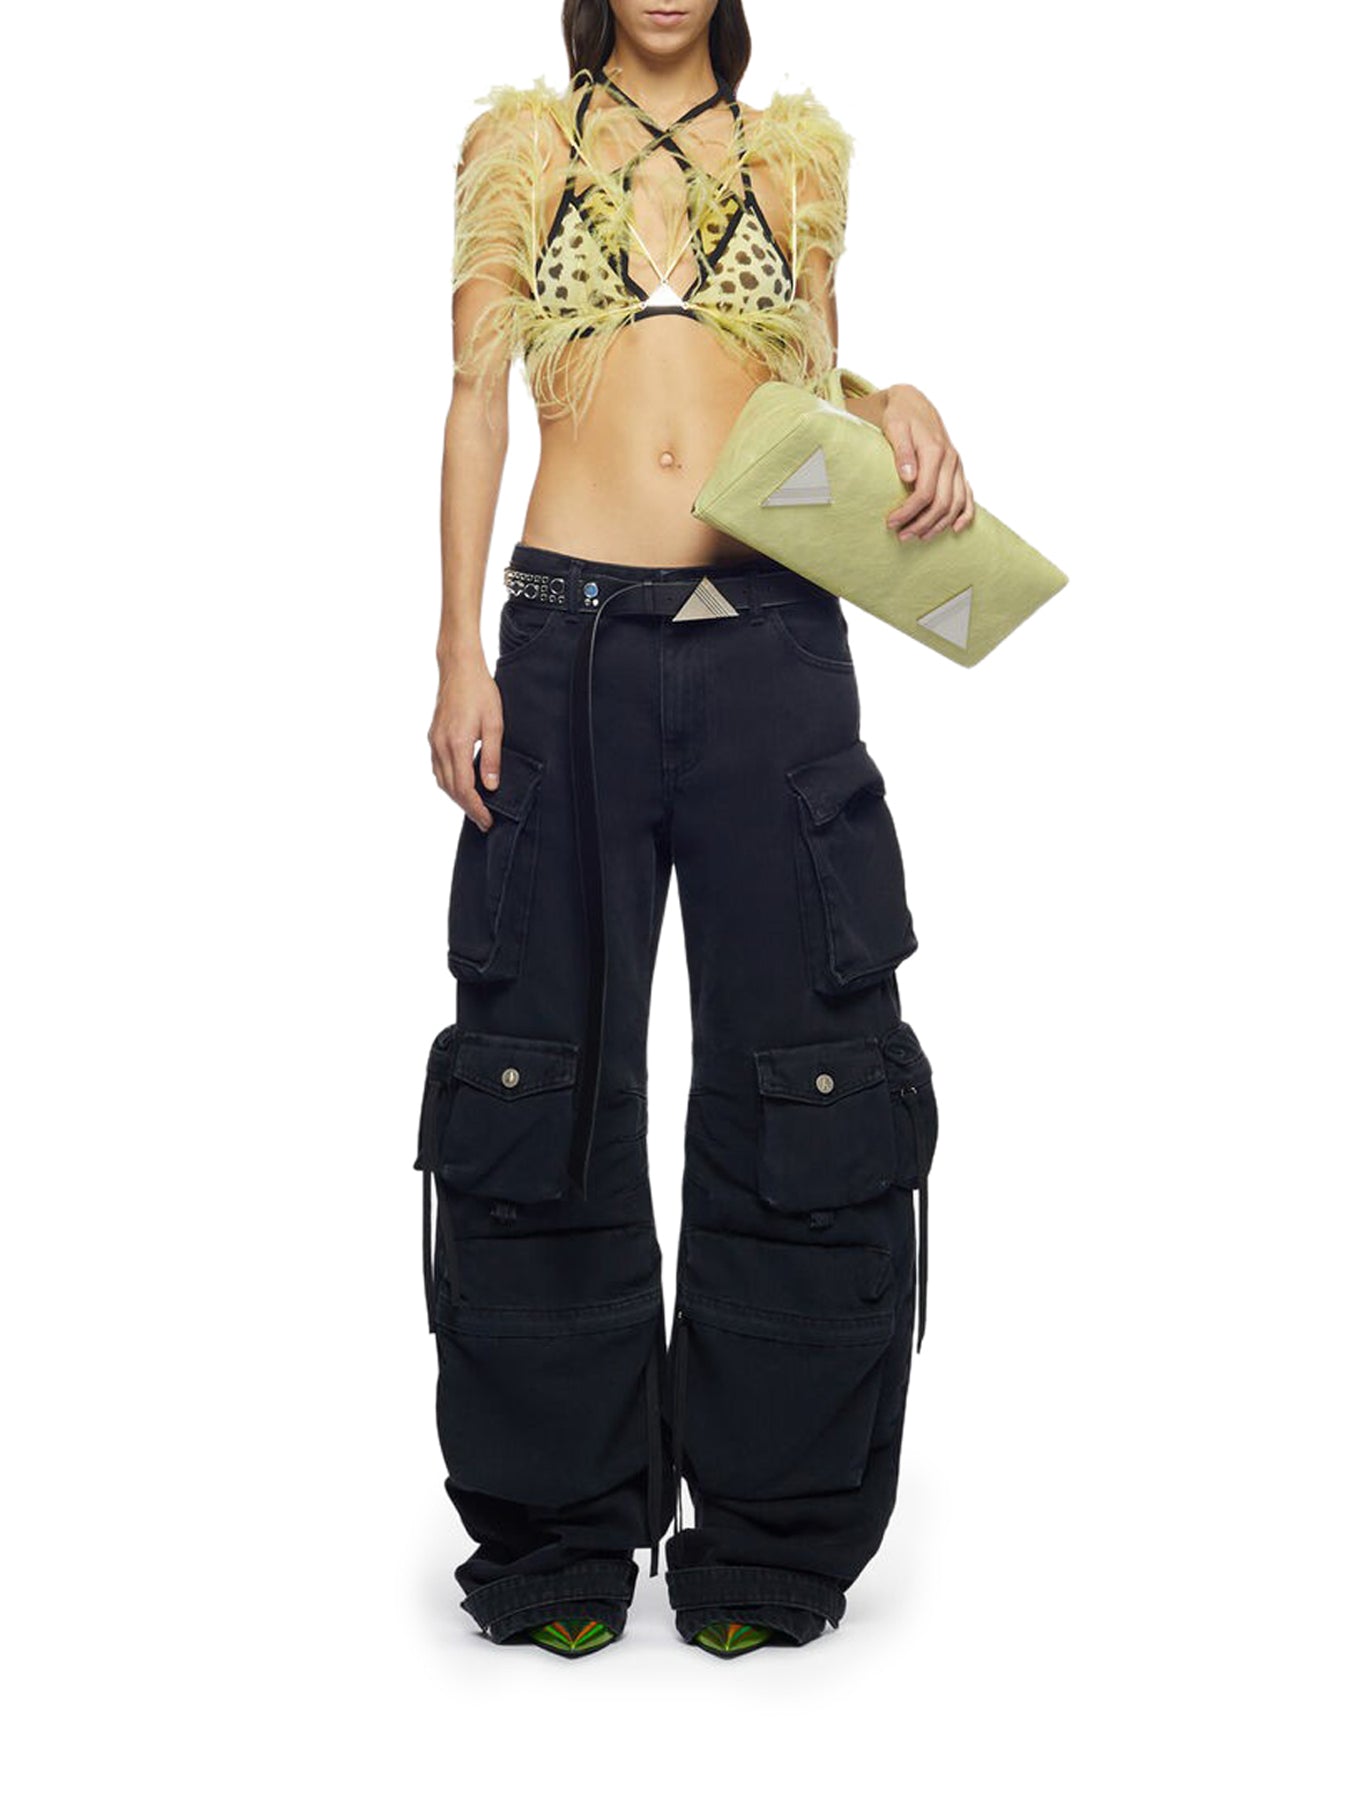 `Fern` cargo pant in black denim with multipockets and wide leg cut.